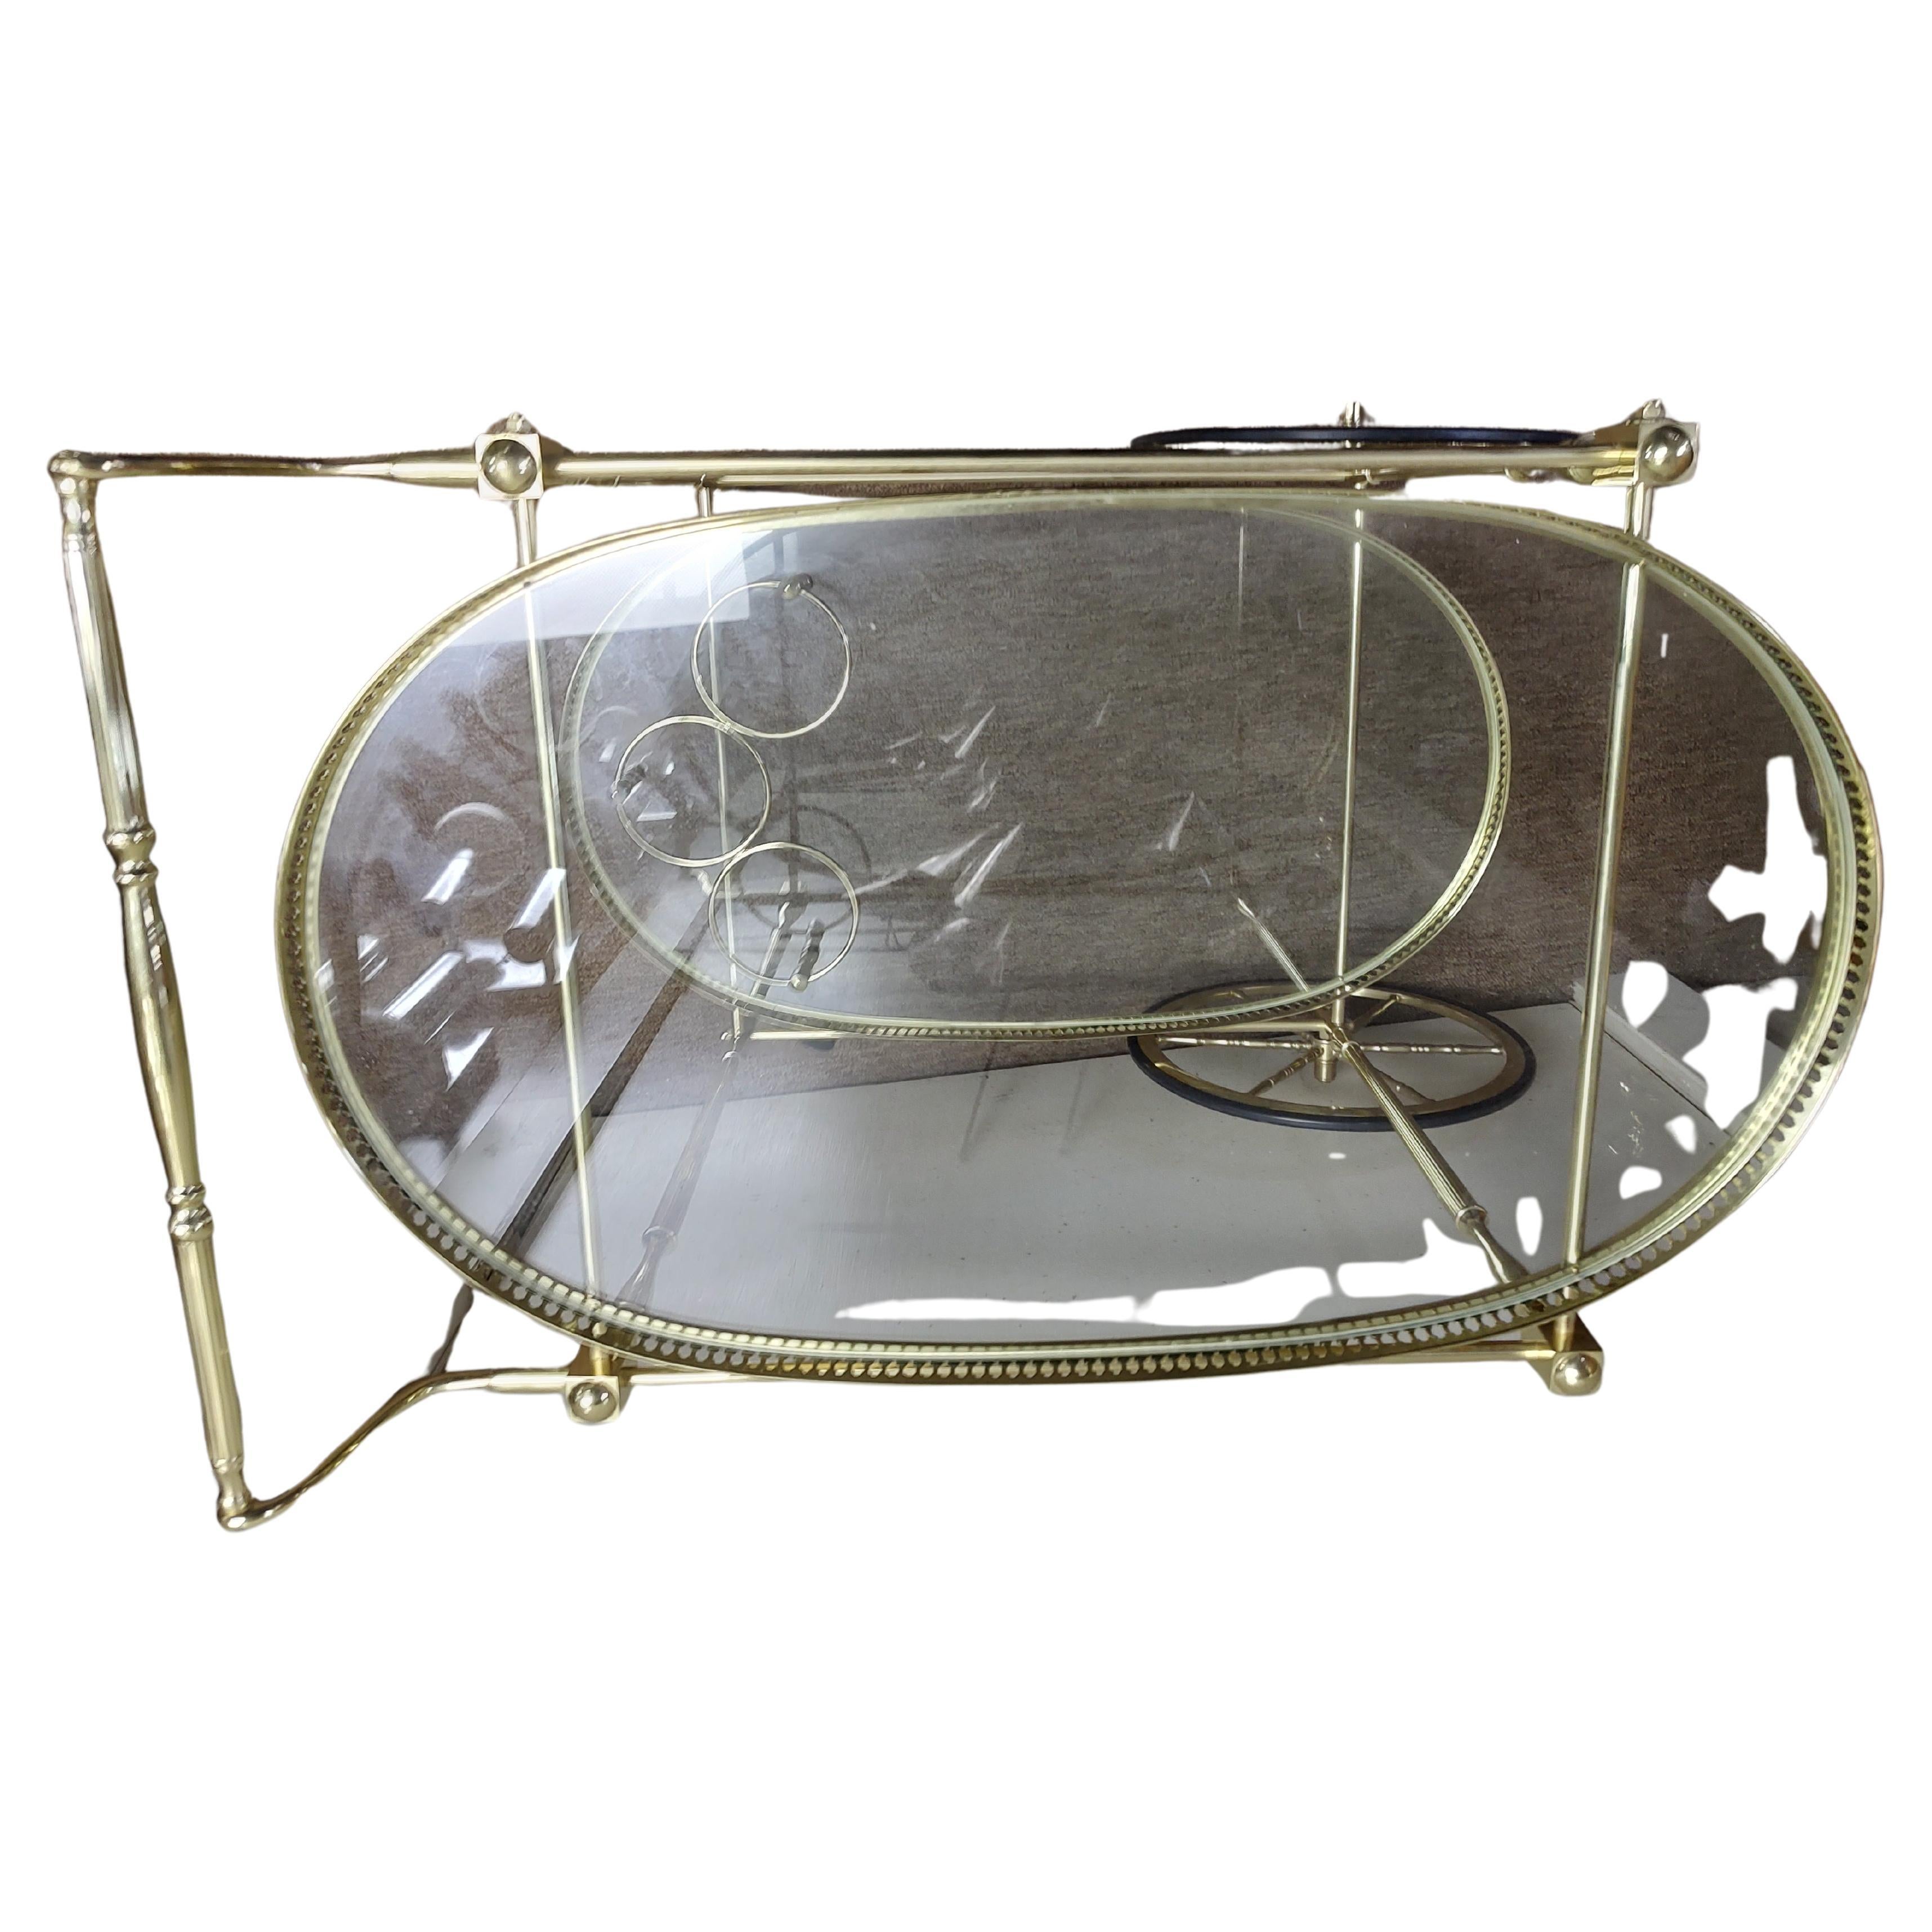 Fabulous bar server cart in polished brass. Great style and in excellent vintage condition with minimal wear. Reticulated banding along the perimeter with fancy leg columns. Bottle holder mounted on bottom shelf. Large round wheels with rubber tires